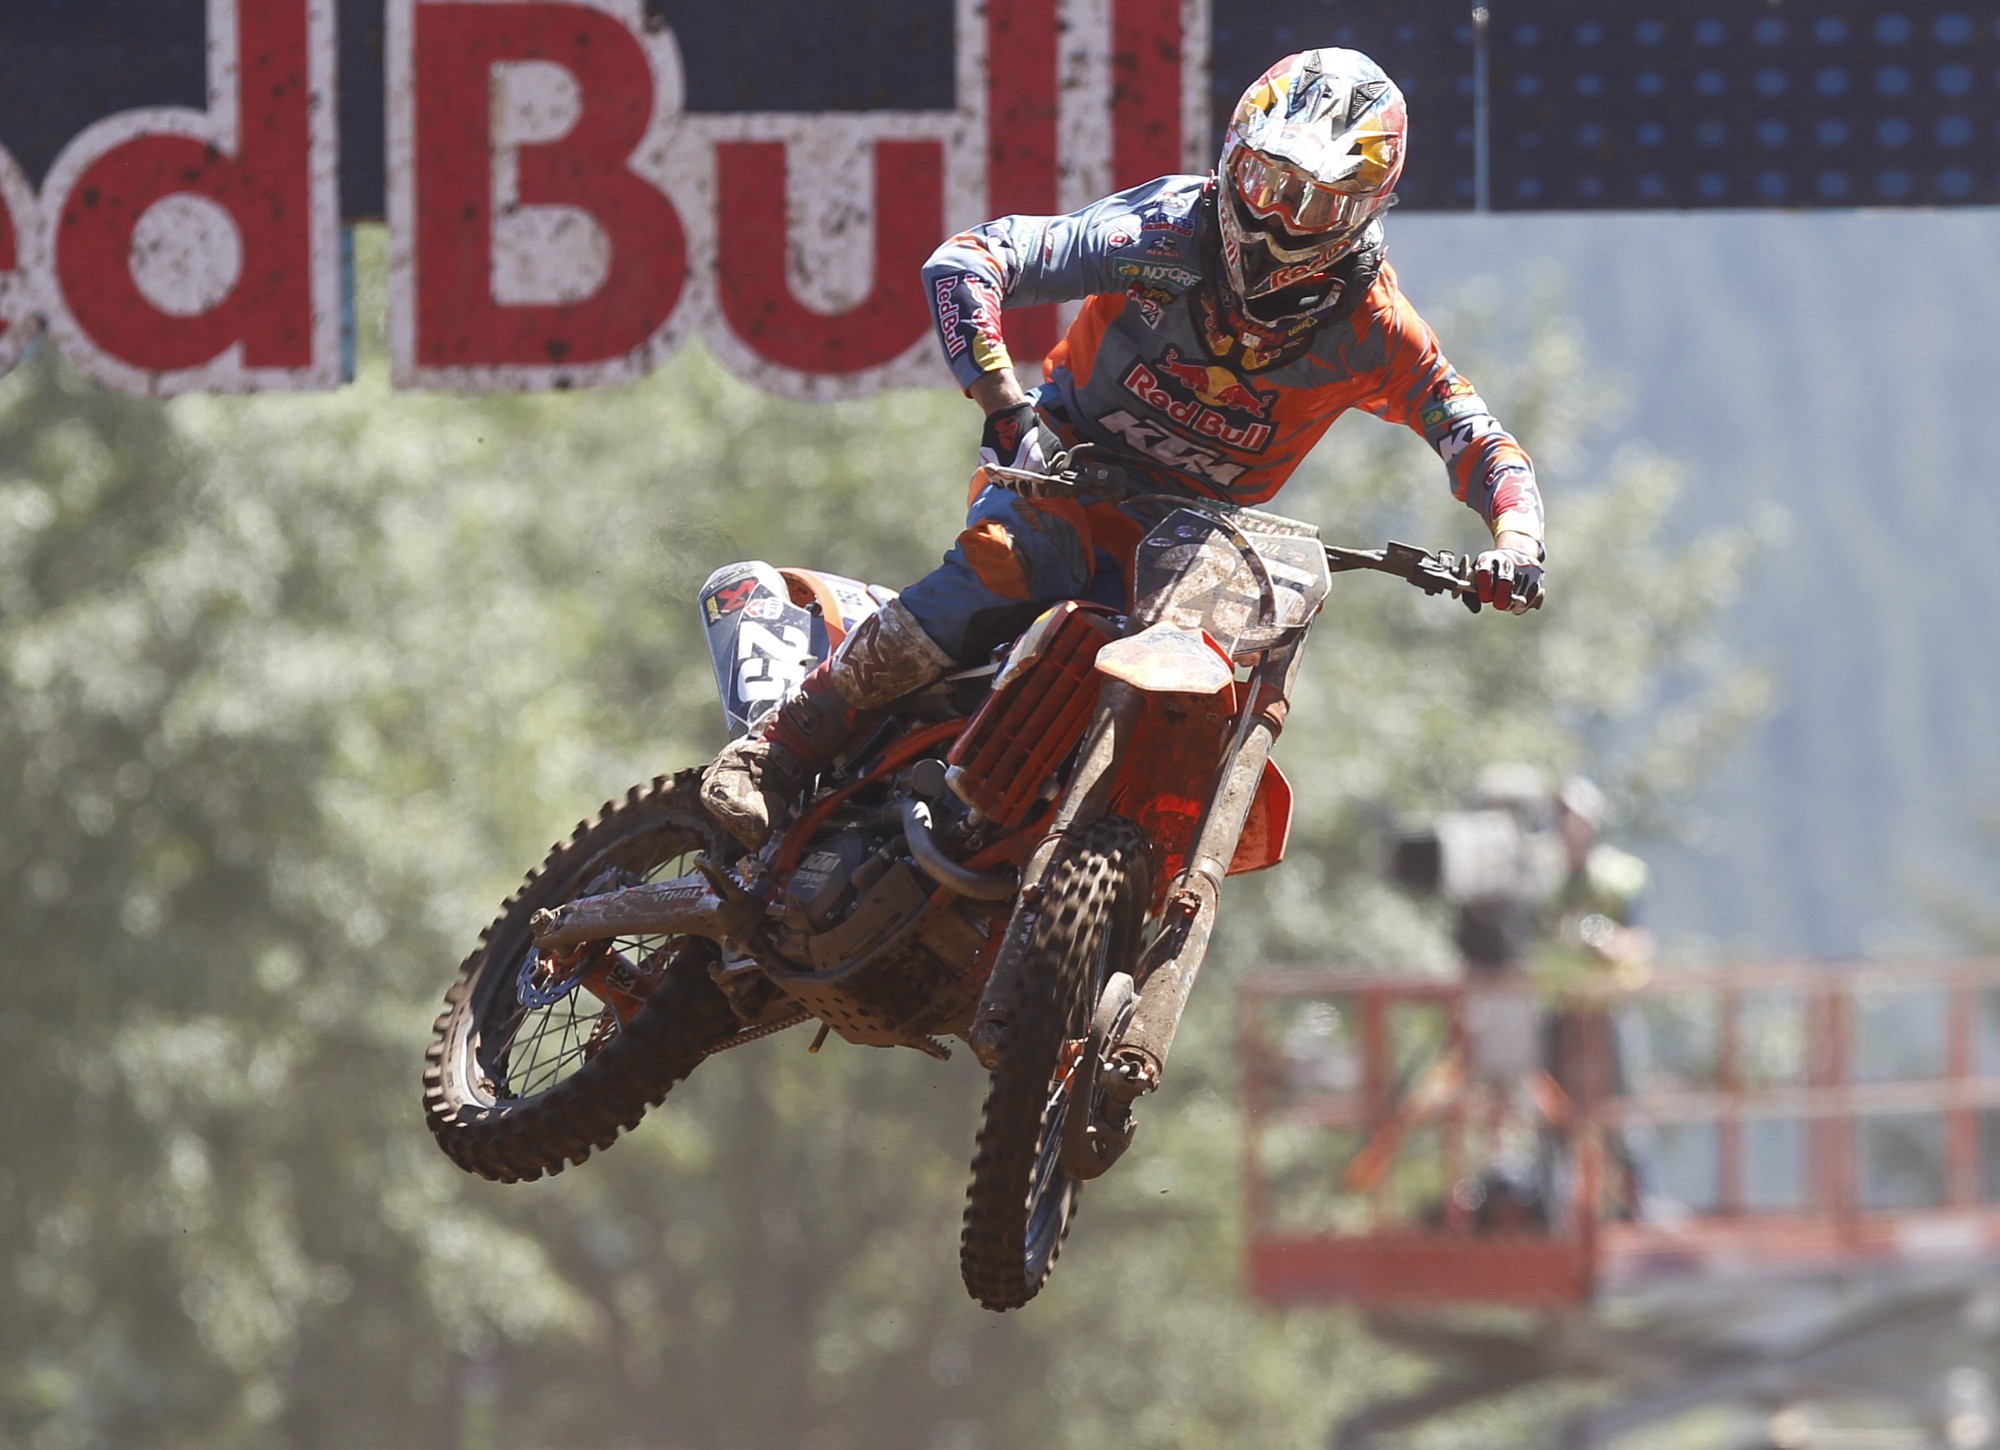 Marvin Musquin in 250MX at the Washougal MX National.